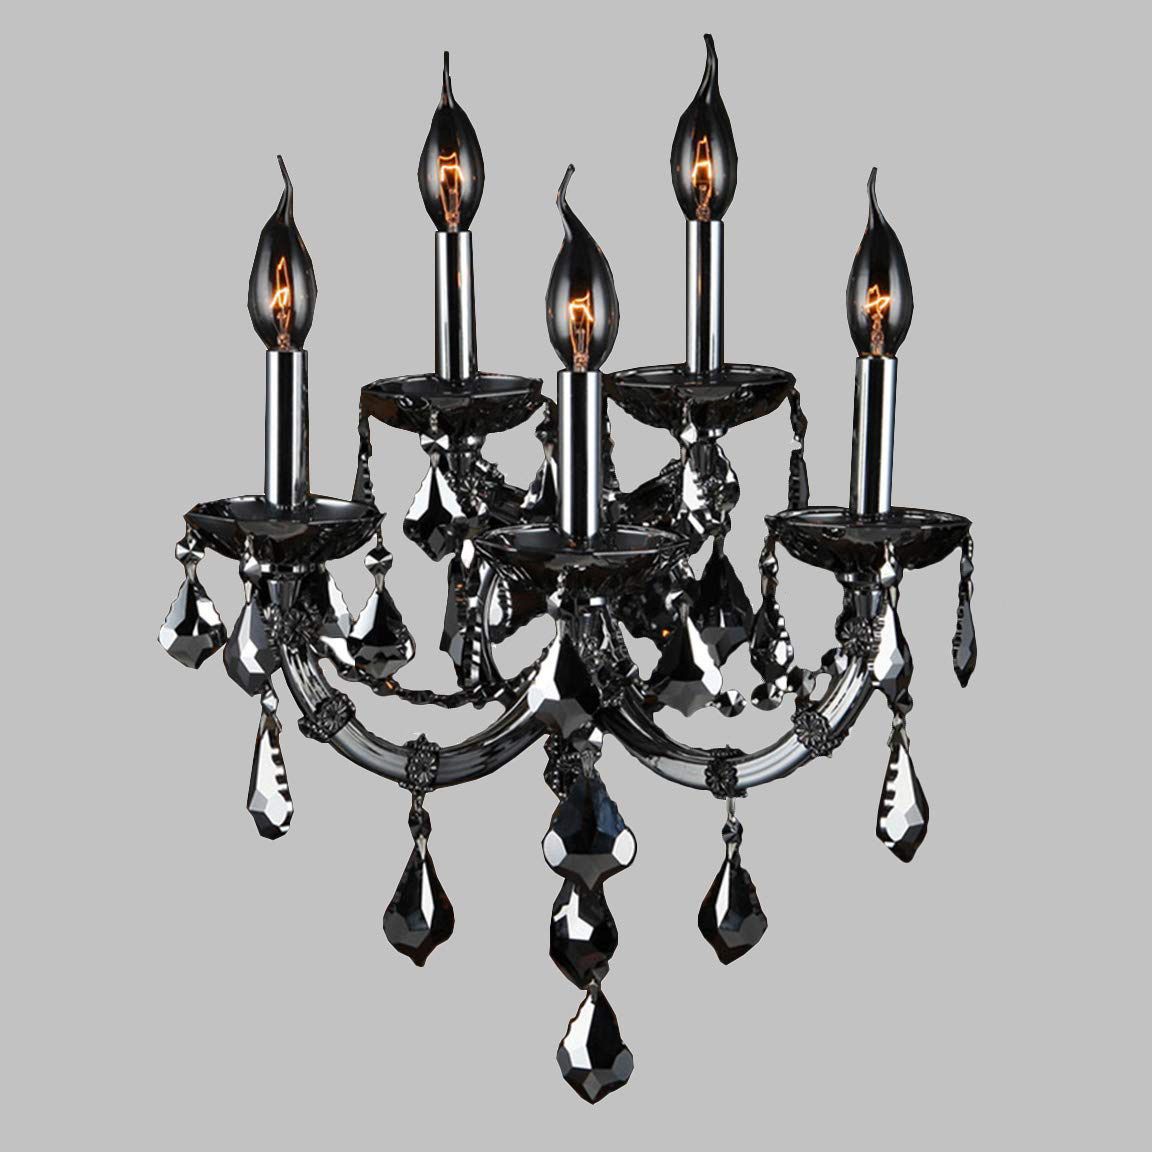 Worldwide Lighting Lyre Collection 5 Light Chrome Finish and Smoke Crystal Wall Sconce 15” W x 20” H Large 2 Tier